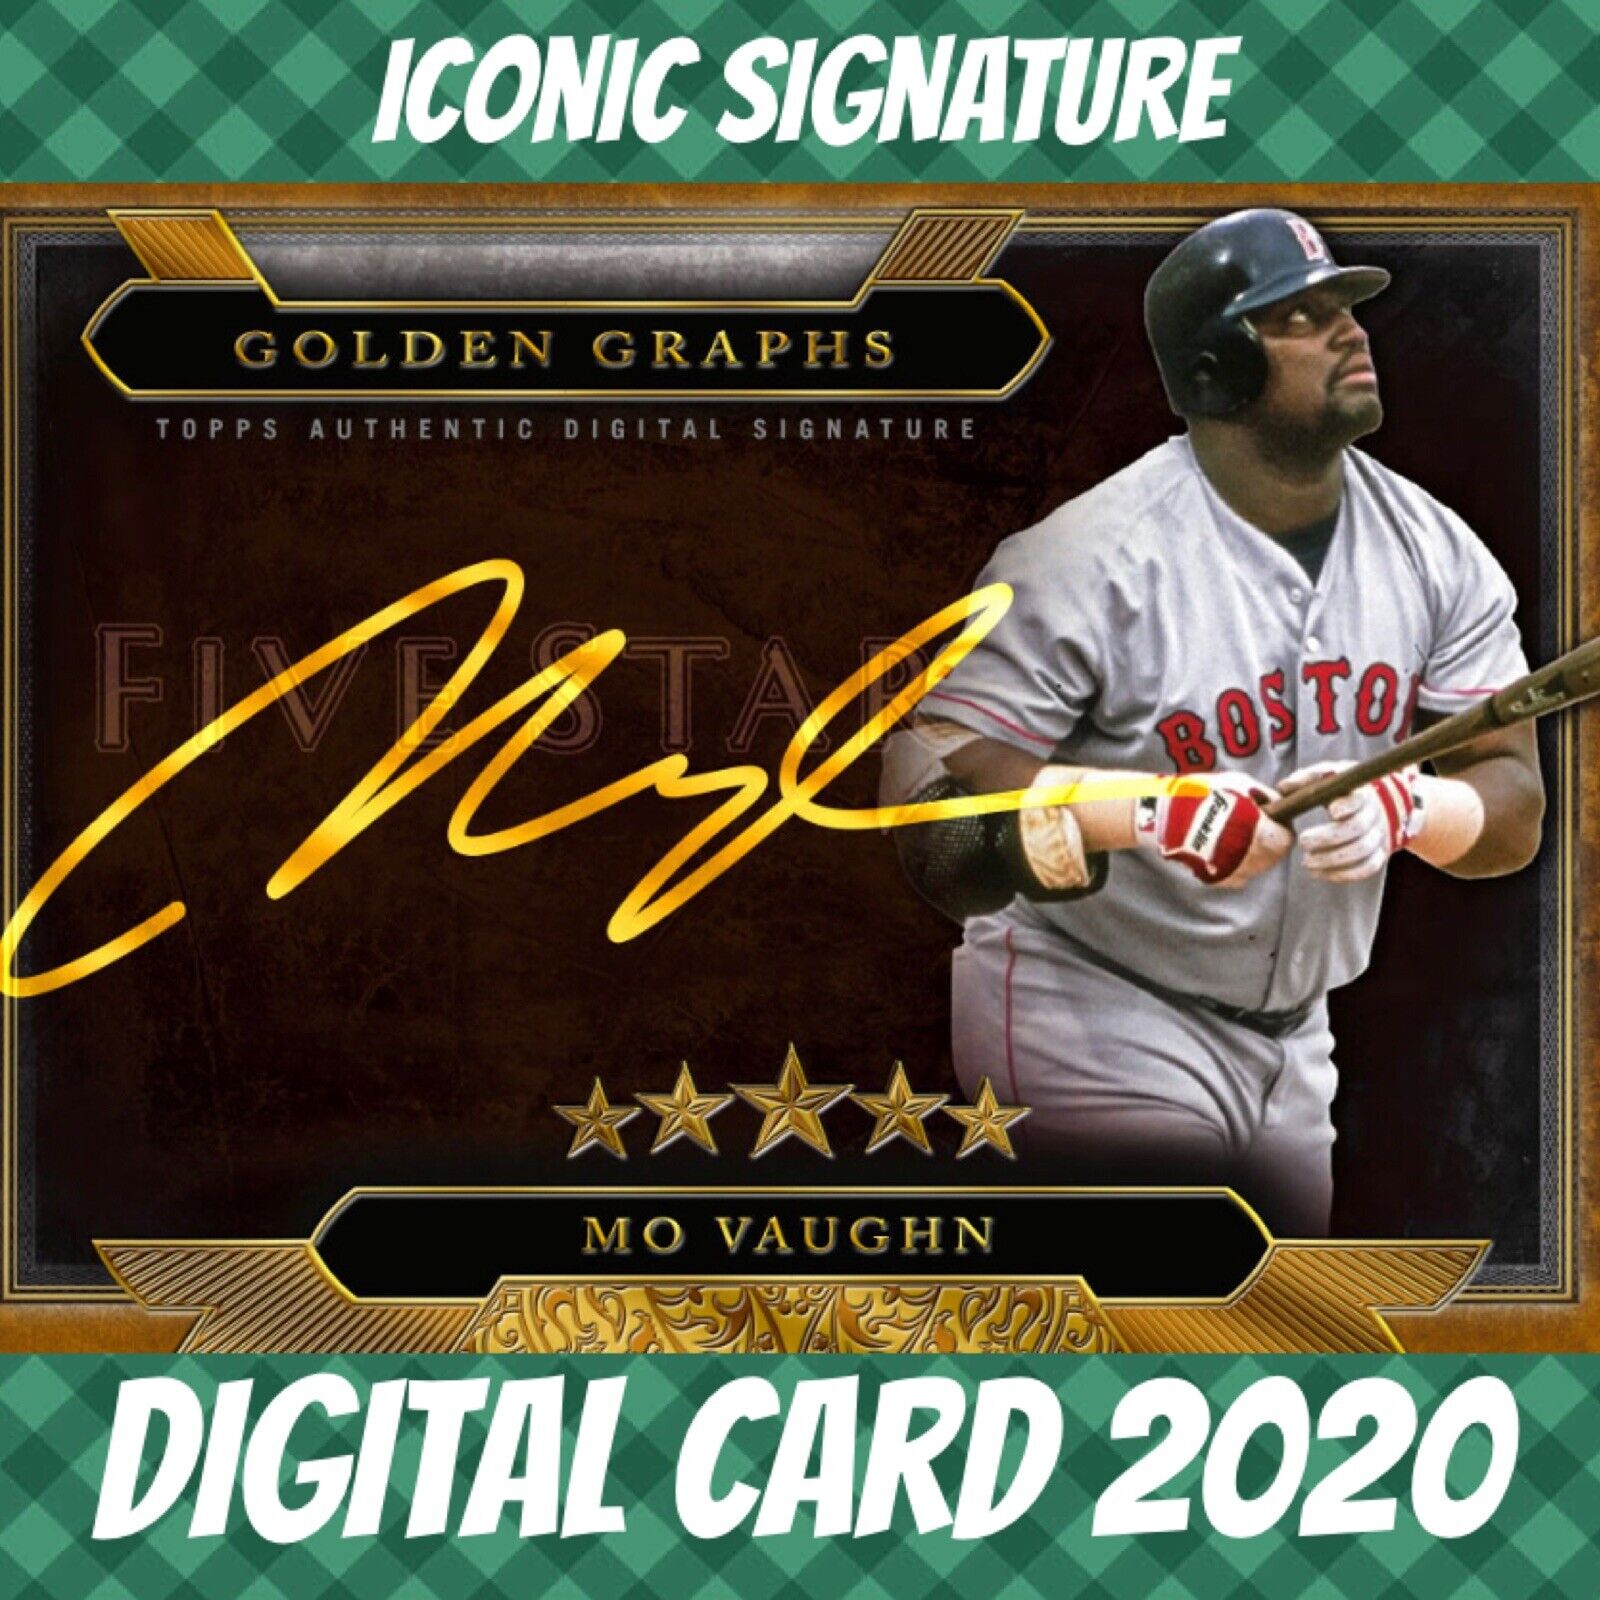 2020 Topps Colorful 20MB Vaughn Five Star Golden Graphs Signature Digital Iconic